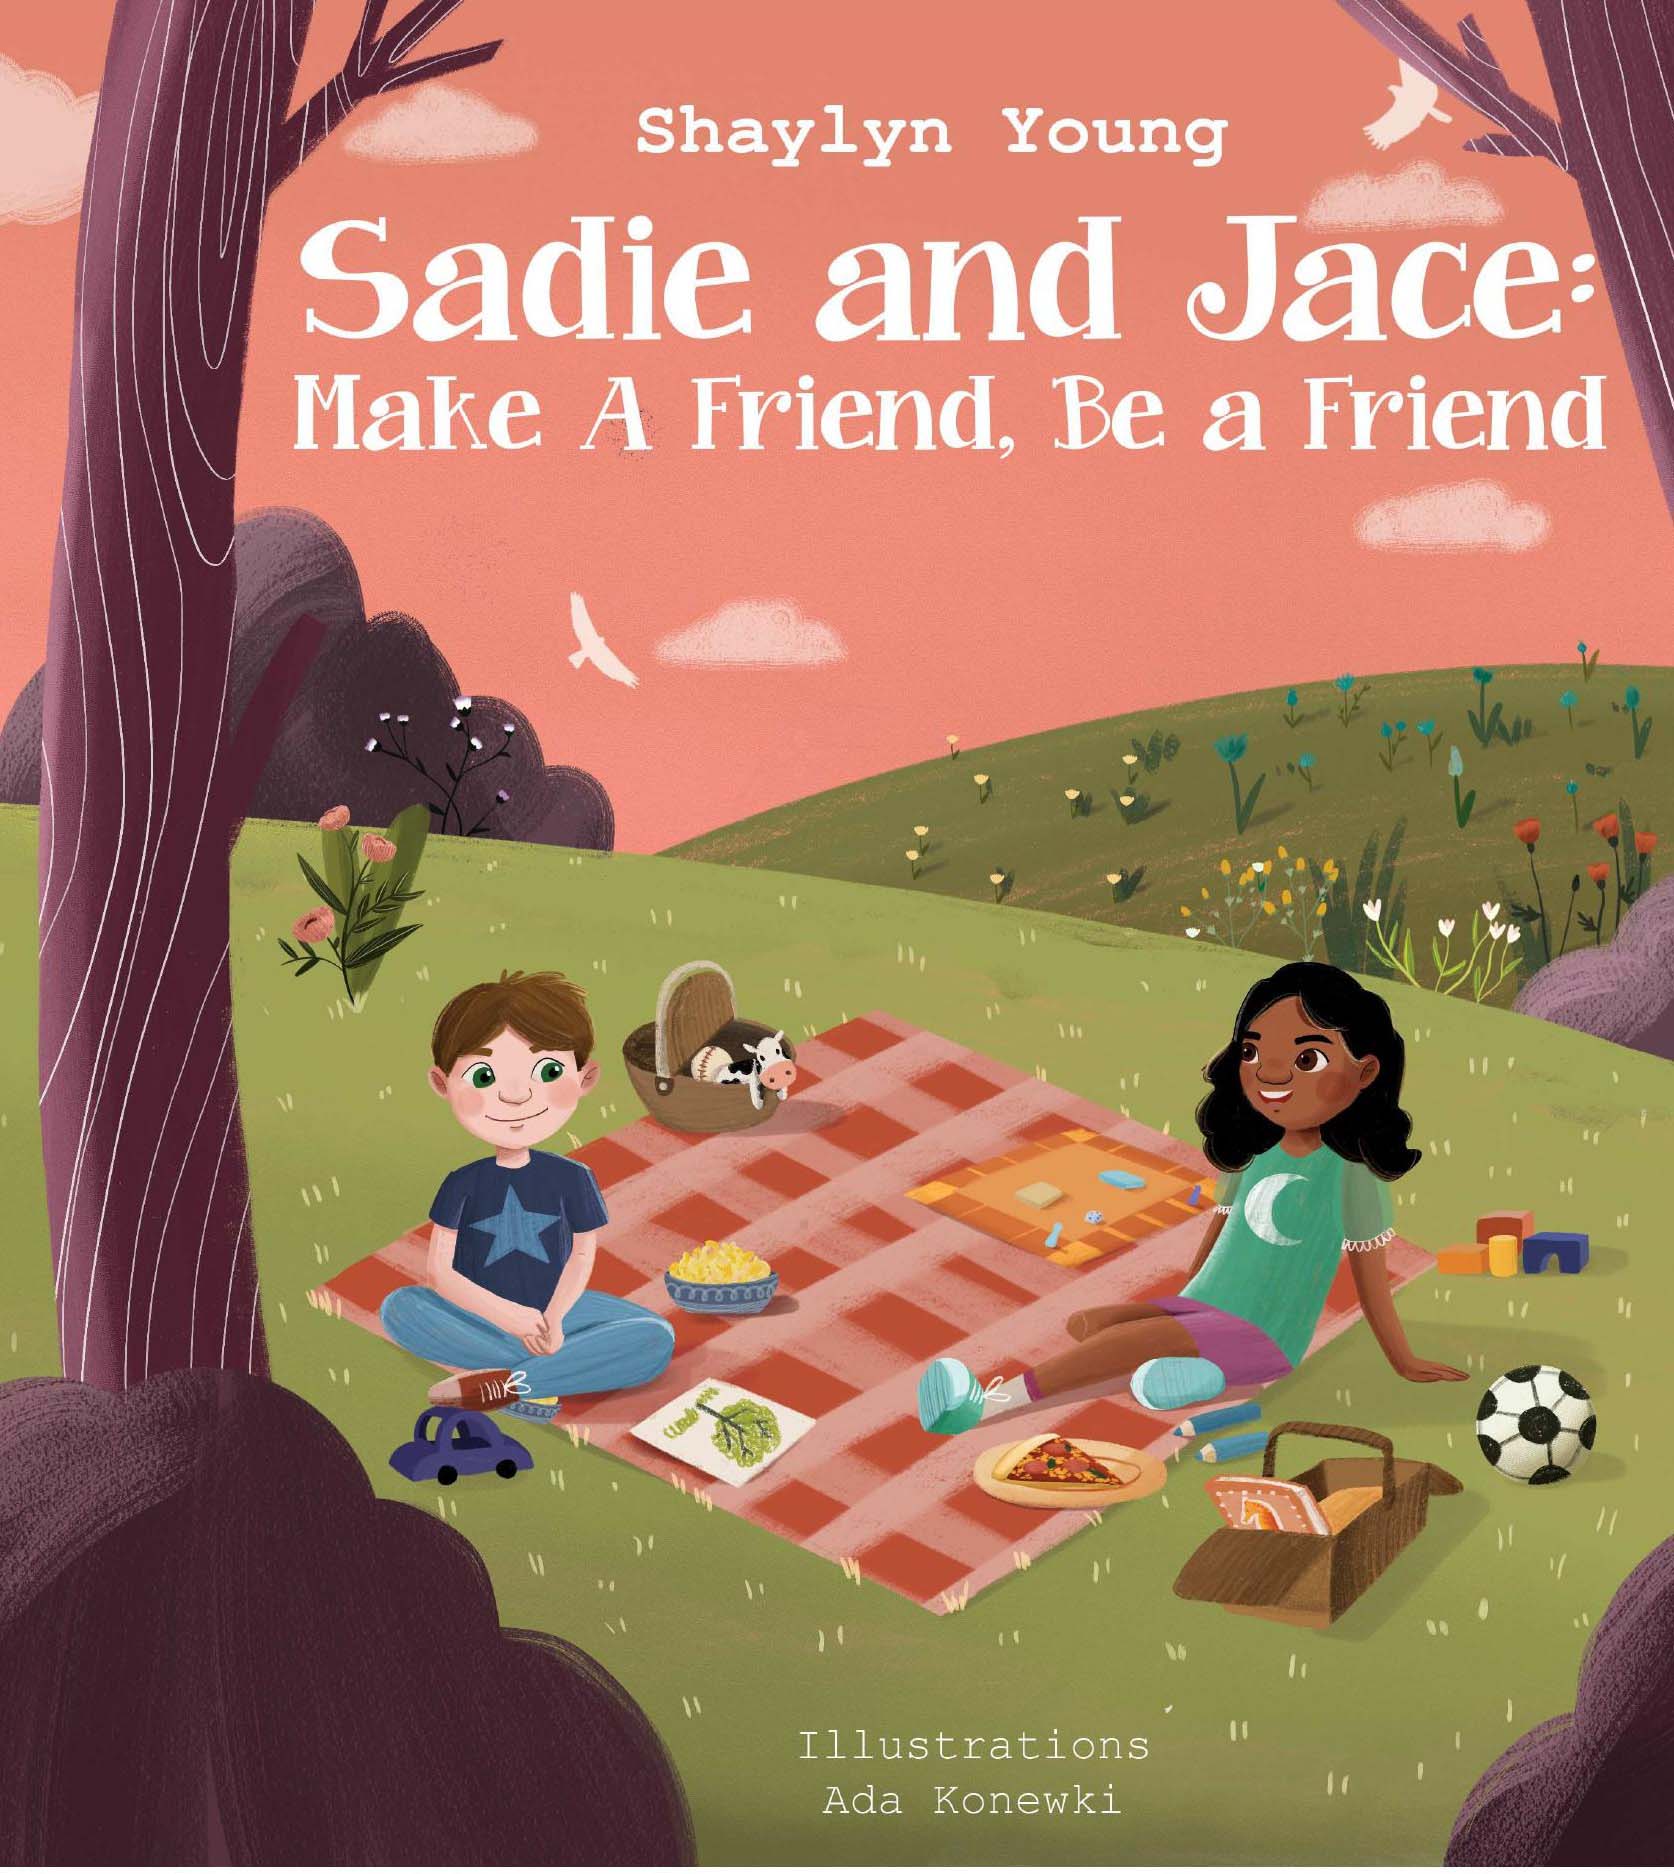 Cover of illustrated book, Sadie and Jace: Make a Friend, Be a friend